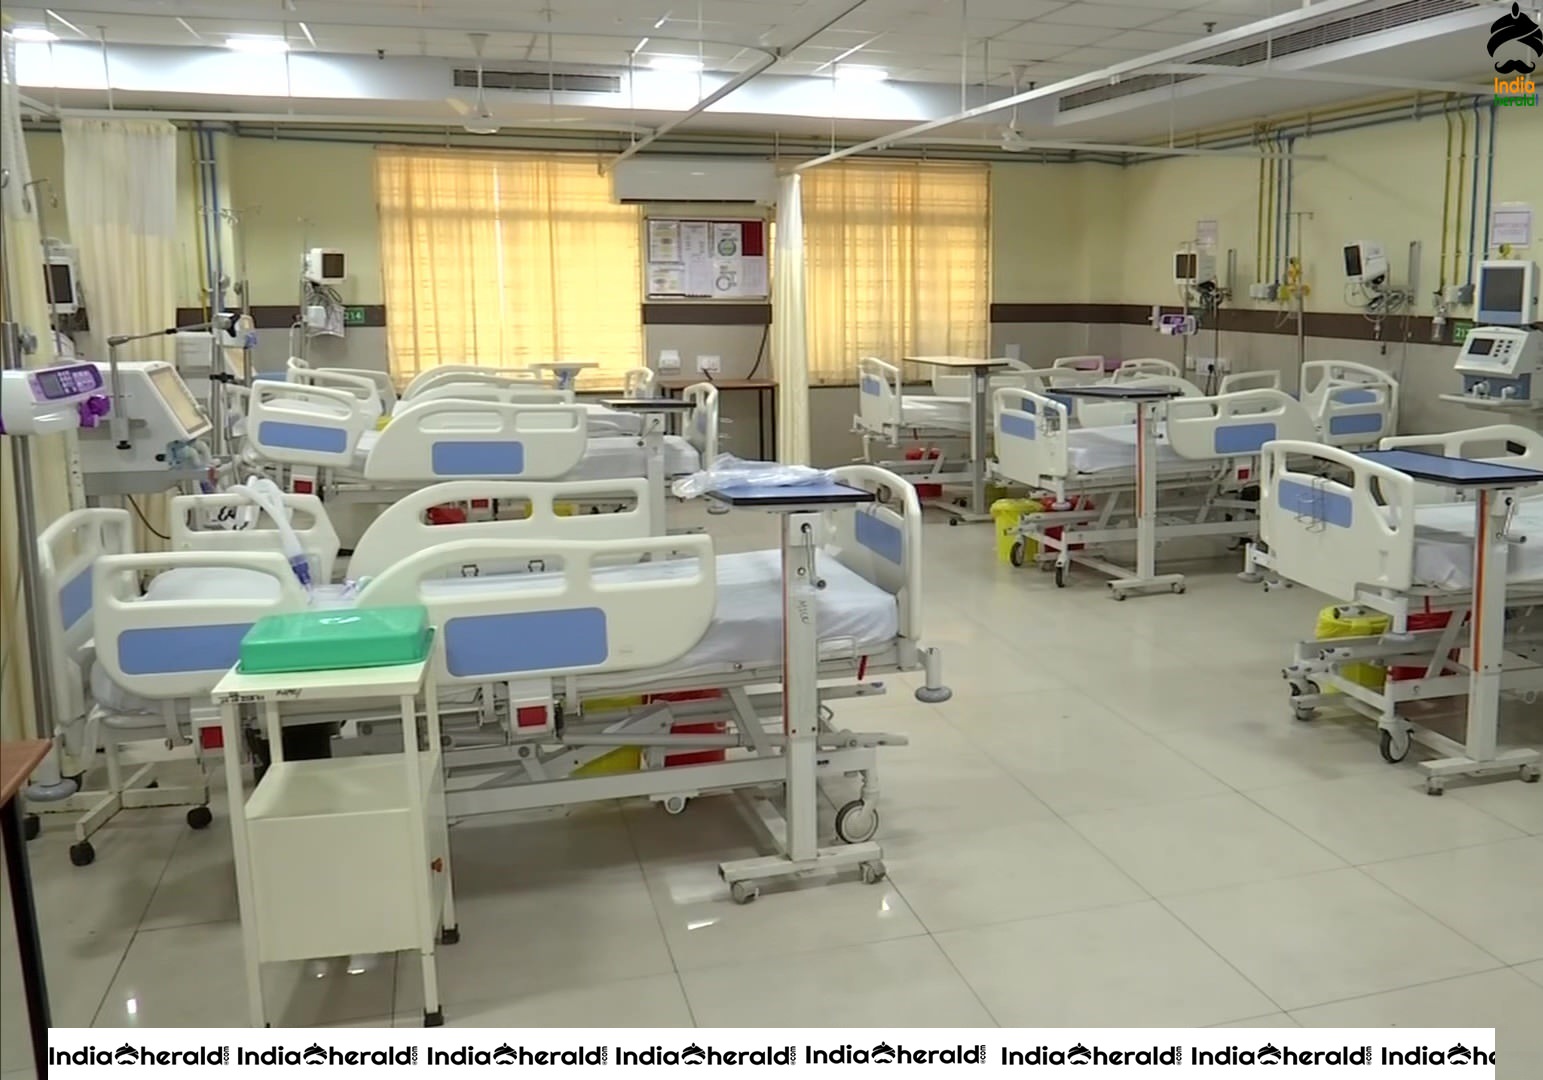 Two dedicated Odisha hospitals with 650 beds capacity provide free treatment to COVID 19 patients